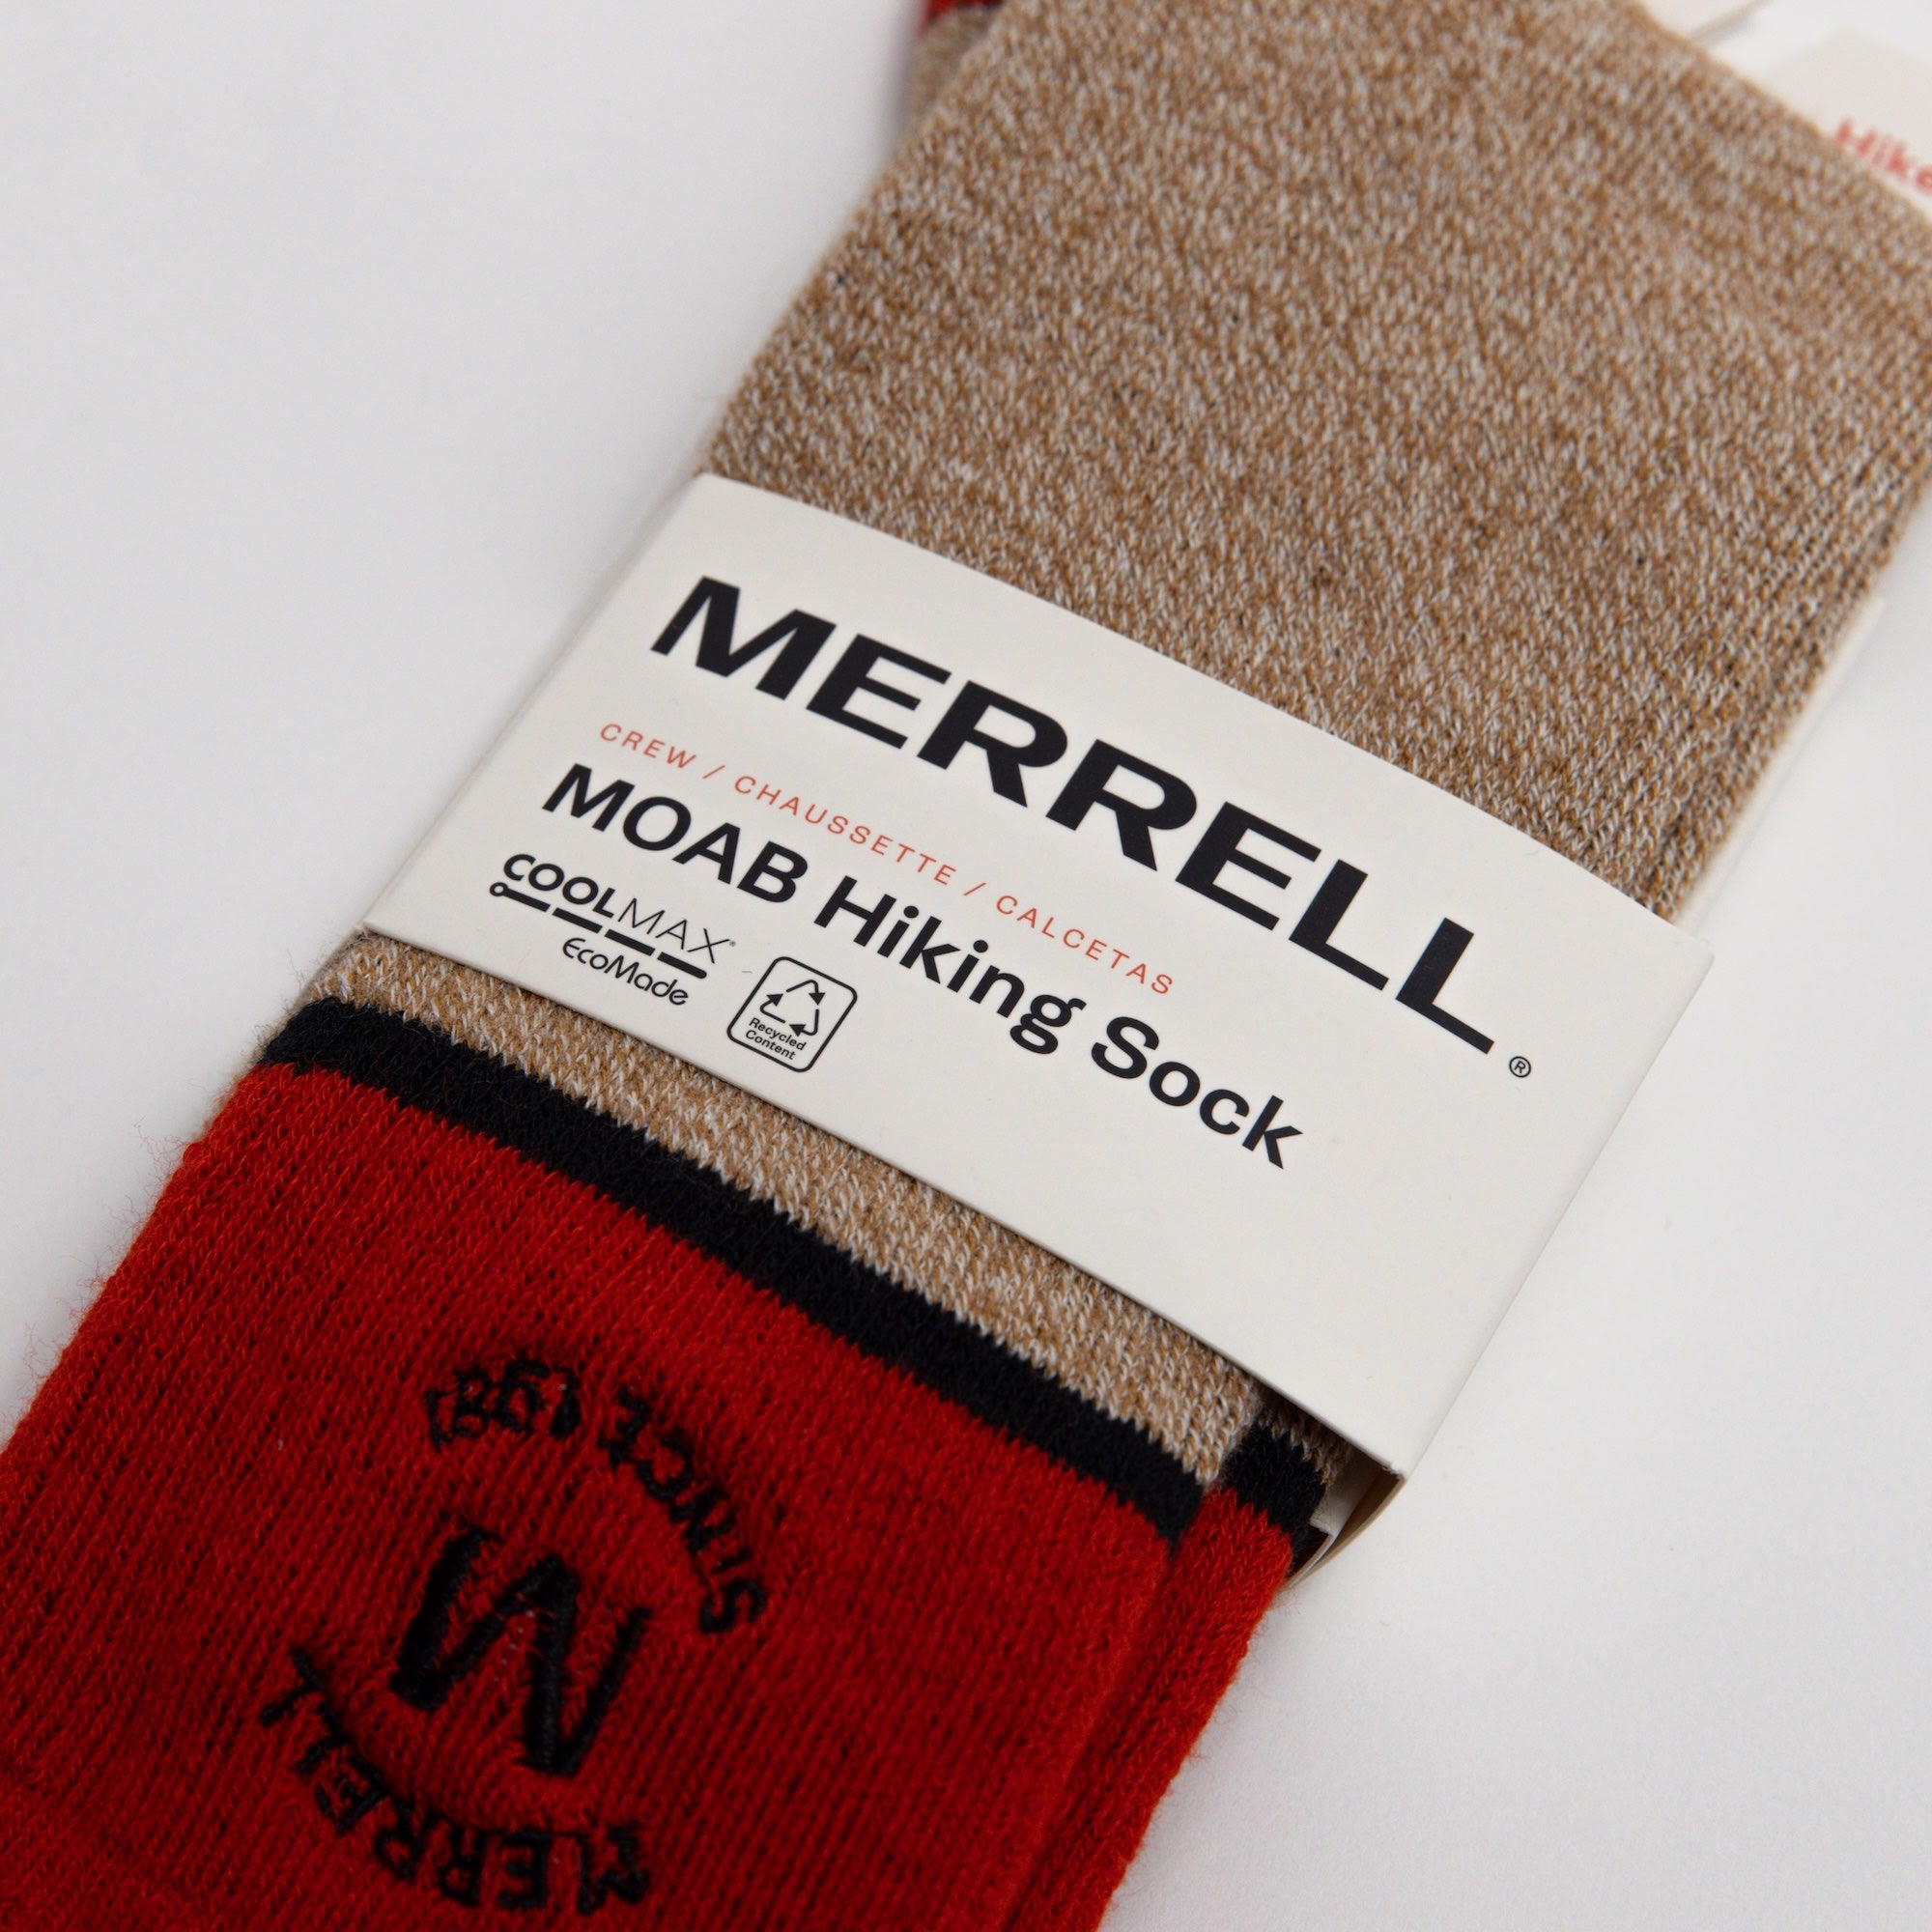 Crew MOAB Hiking Sock 3 Pack - Red